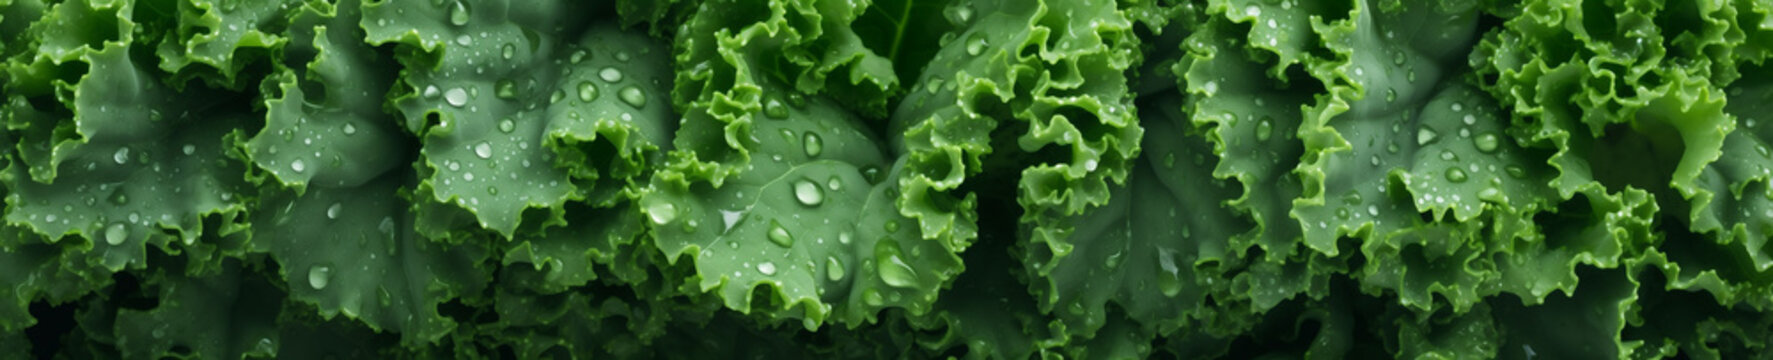 An Overhead Photo of Fresh Kale Covered in Water Drops